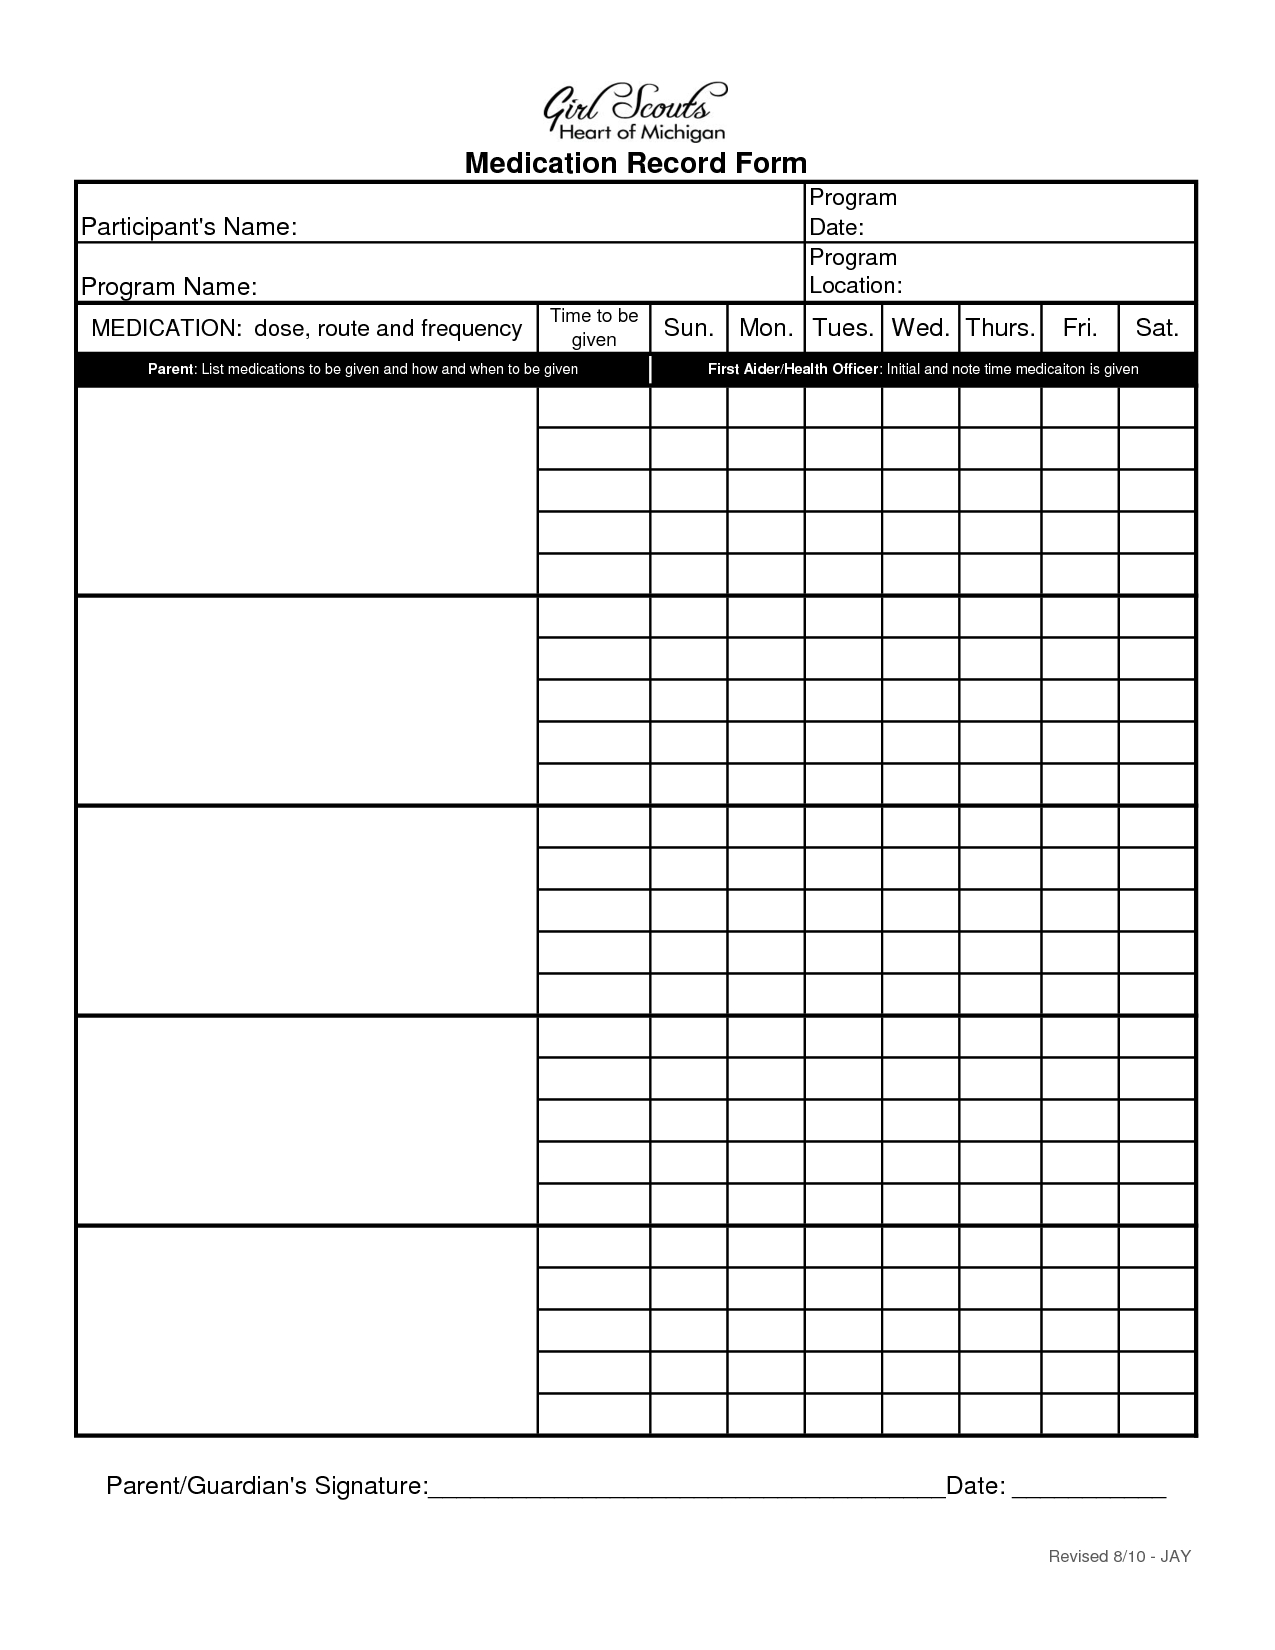 Medication Schedule Spreadsheet For Daily Medication Schedule Spreadsheet Sheet Blank Administration